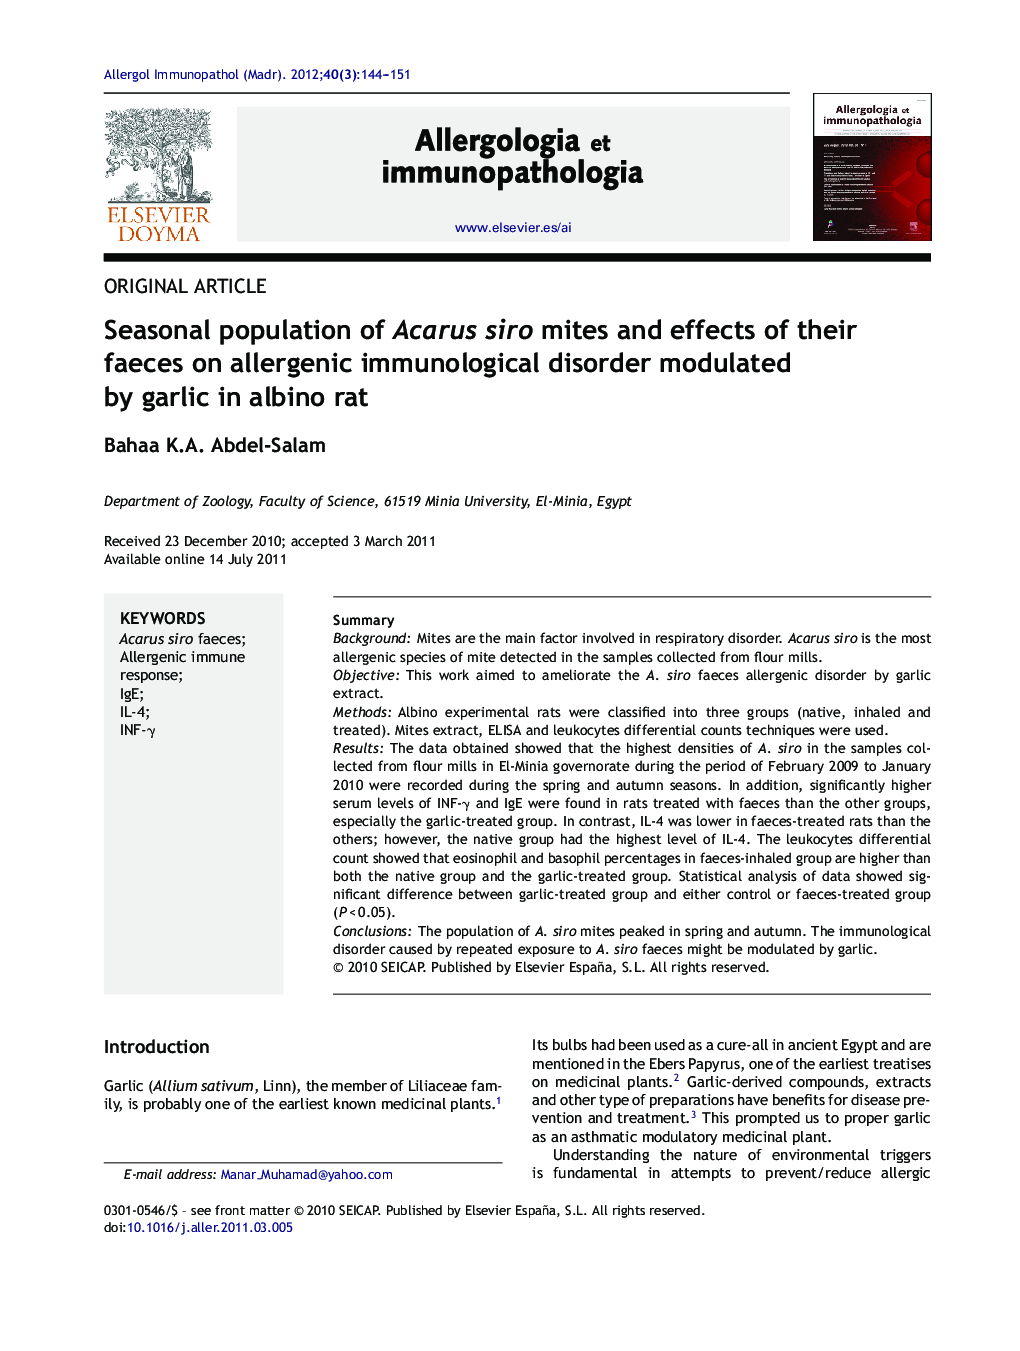 Seasonal population of Acarus siro mites and effects of their faeces on allergenic immunological disorder modulated by garlic in albino rat